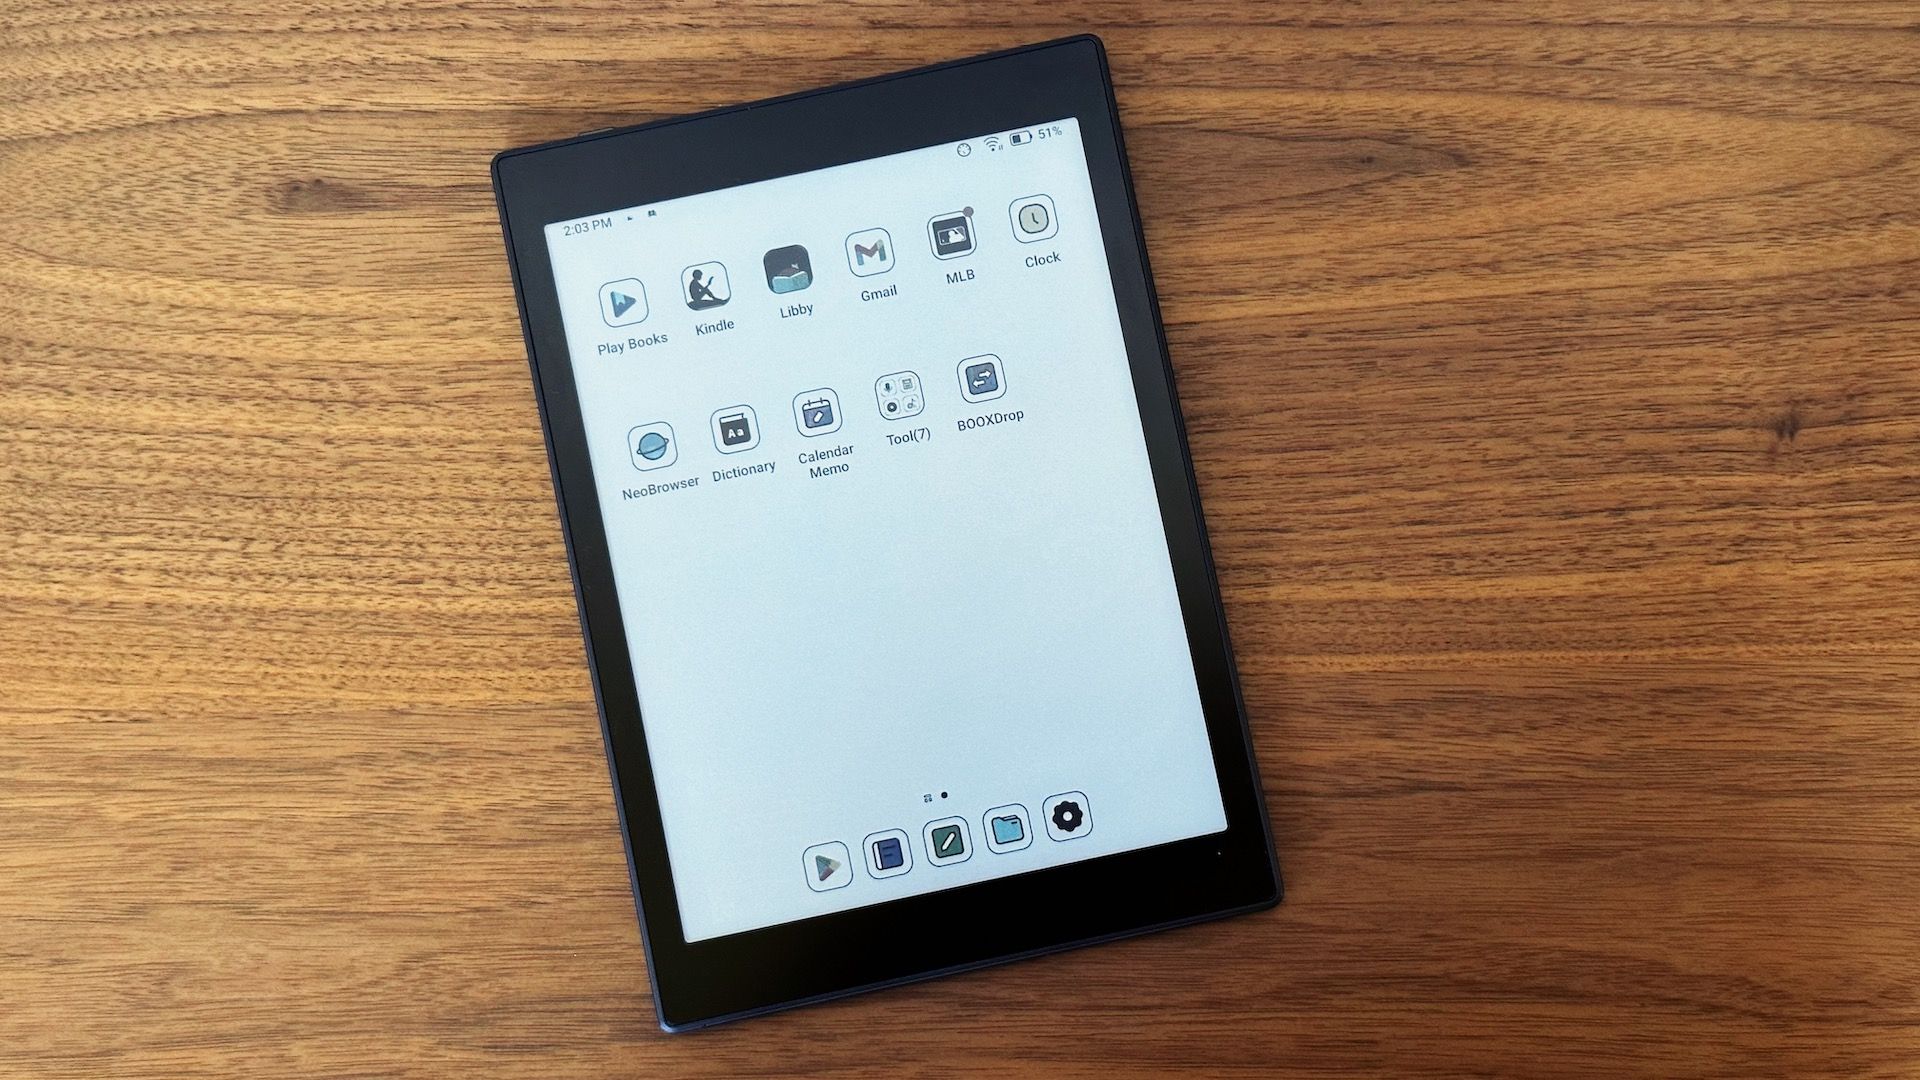 Tab Mini C tablet showing its home screen with Android apps installed